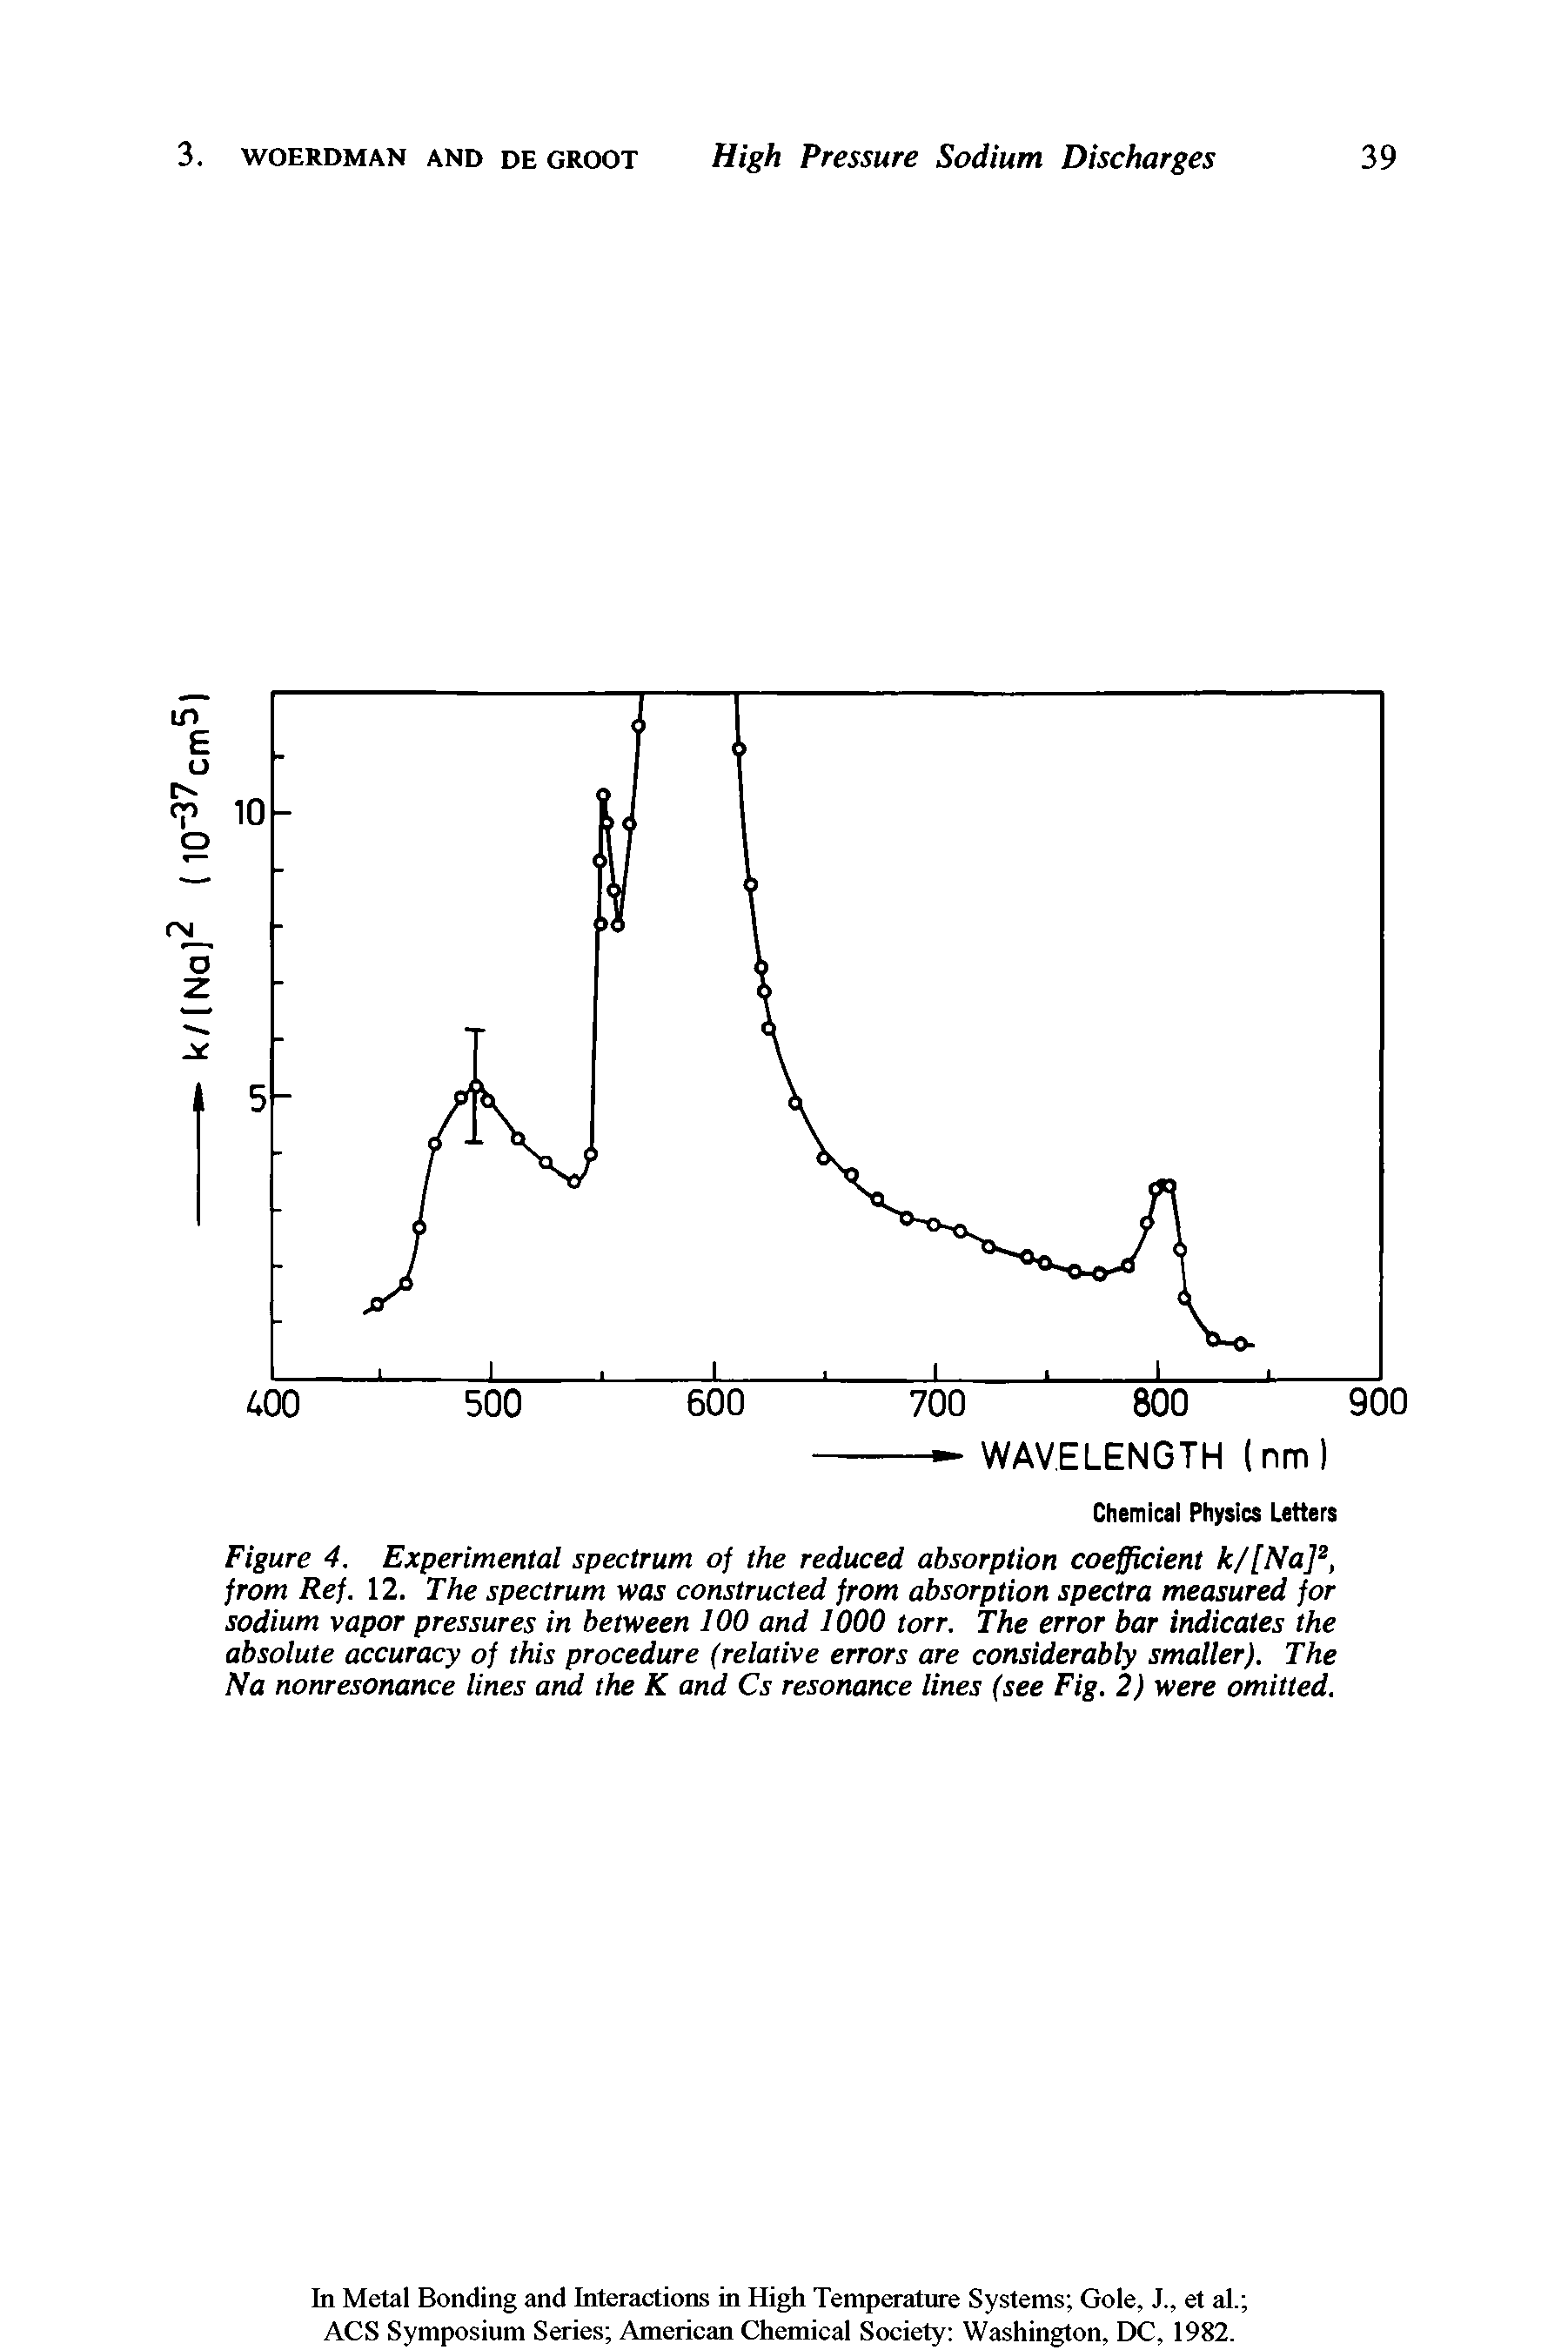 Figure 4. Experimental spectrum of the reduced absorption coefficient k/[NaP, from Ref. 12. The spectrum was constructed from absorption spectra measured for sodium vapor pressures in between 100 and 1000 torr. The error bar indicates the absolute accuracy of this procedure (relative errors are considerably smaller). The Na nonresonance lines and the K and Cs resonance lines (see Fig. 2) were omitted.